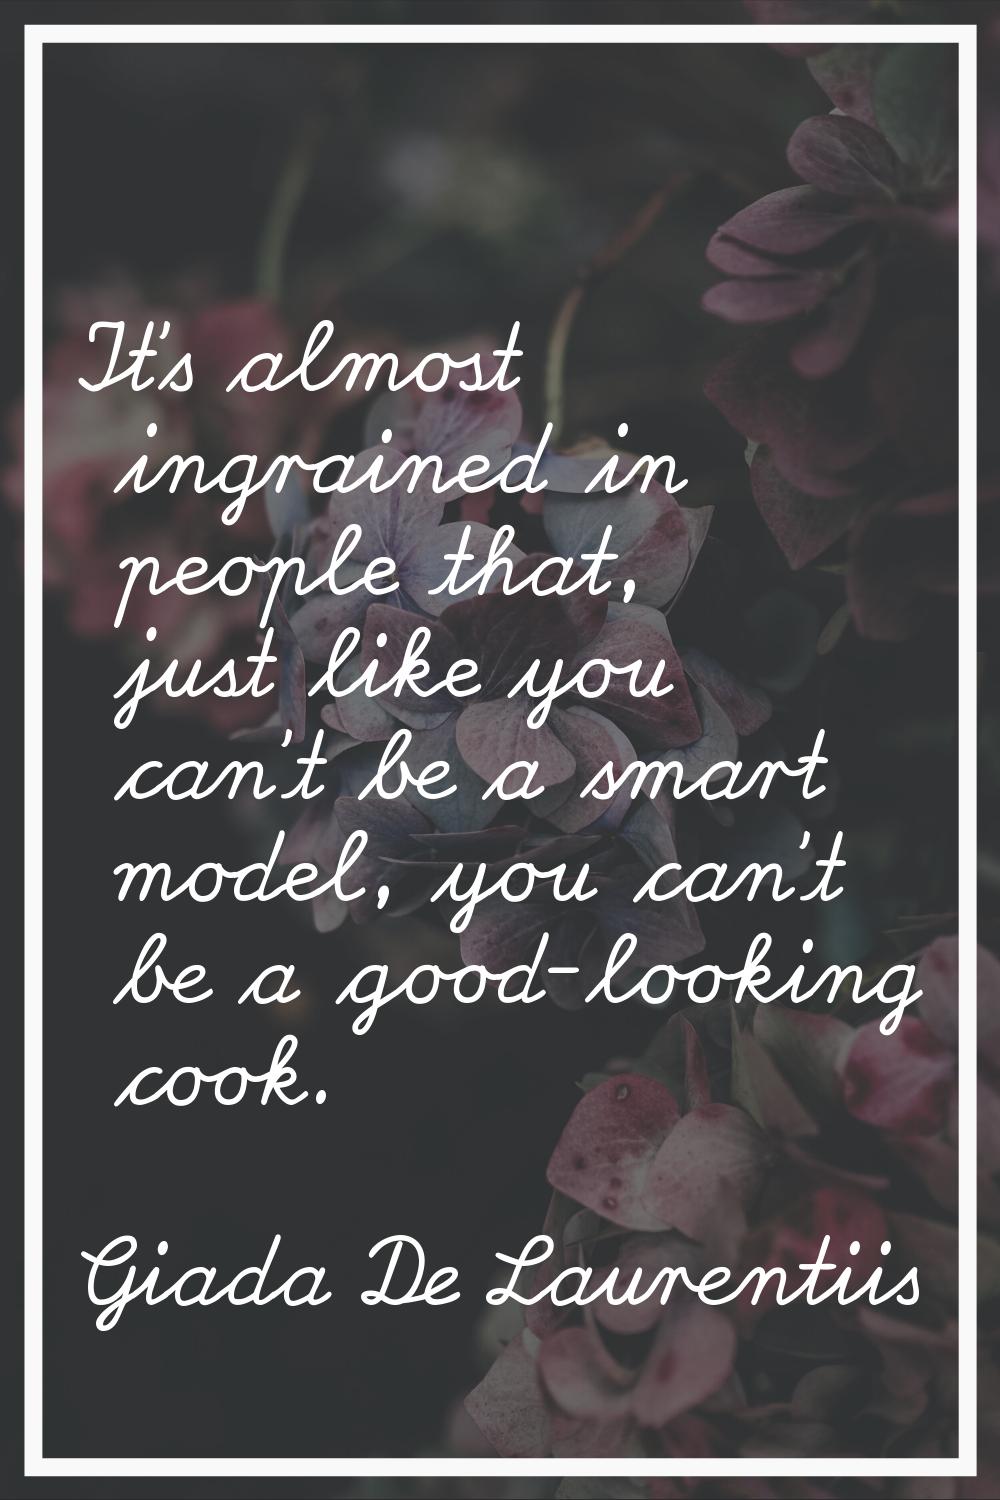 It's almost ingrained in people that, just like you can't be a smart model, you can't be a good-loo